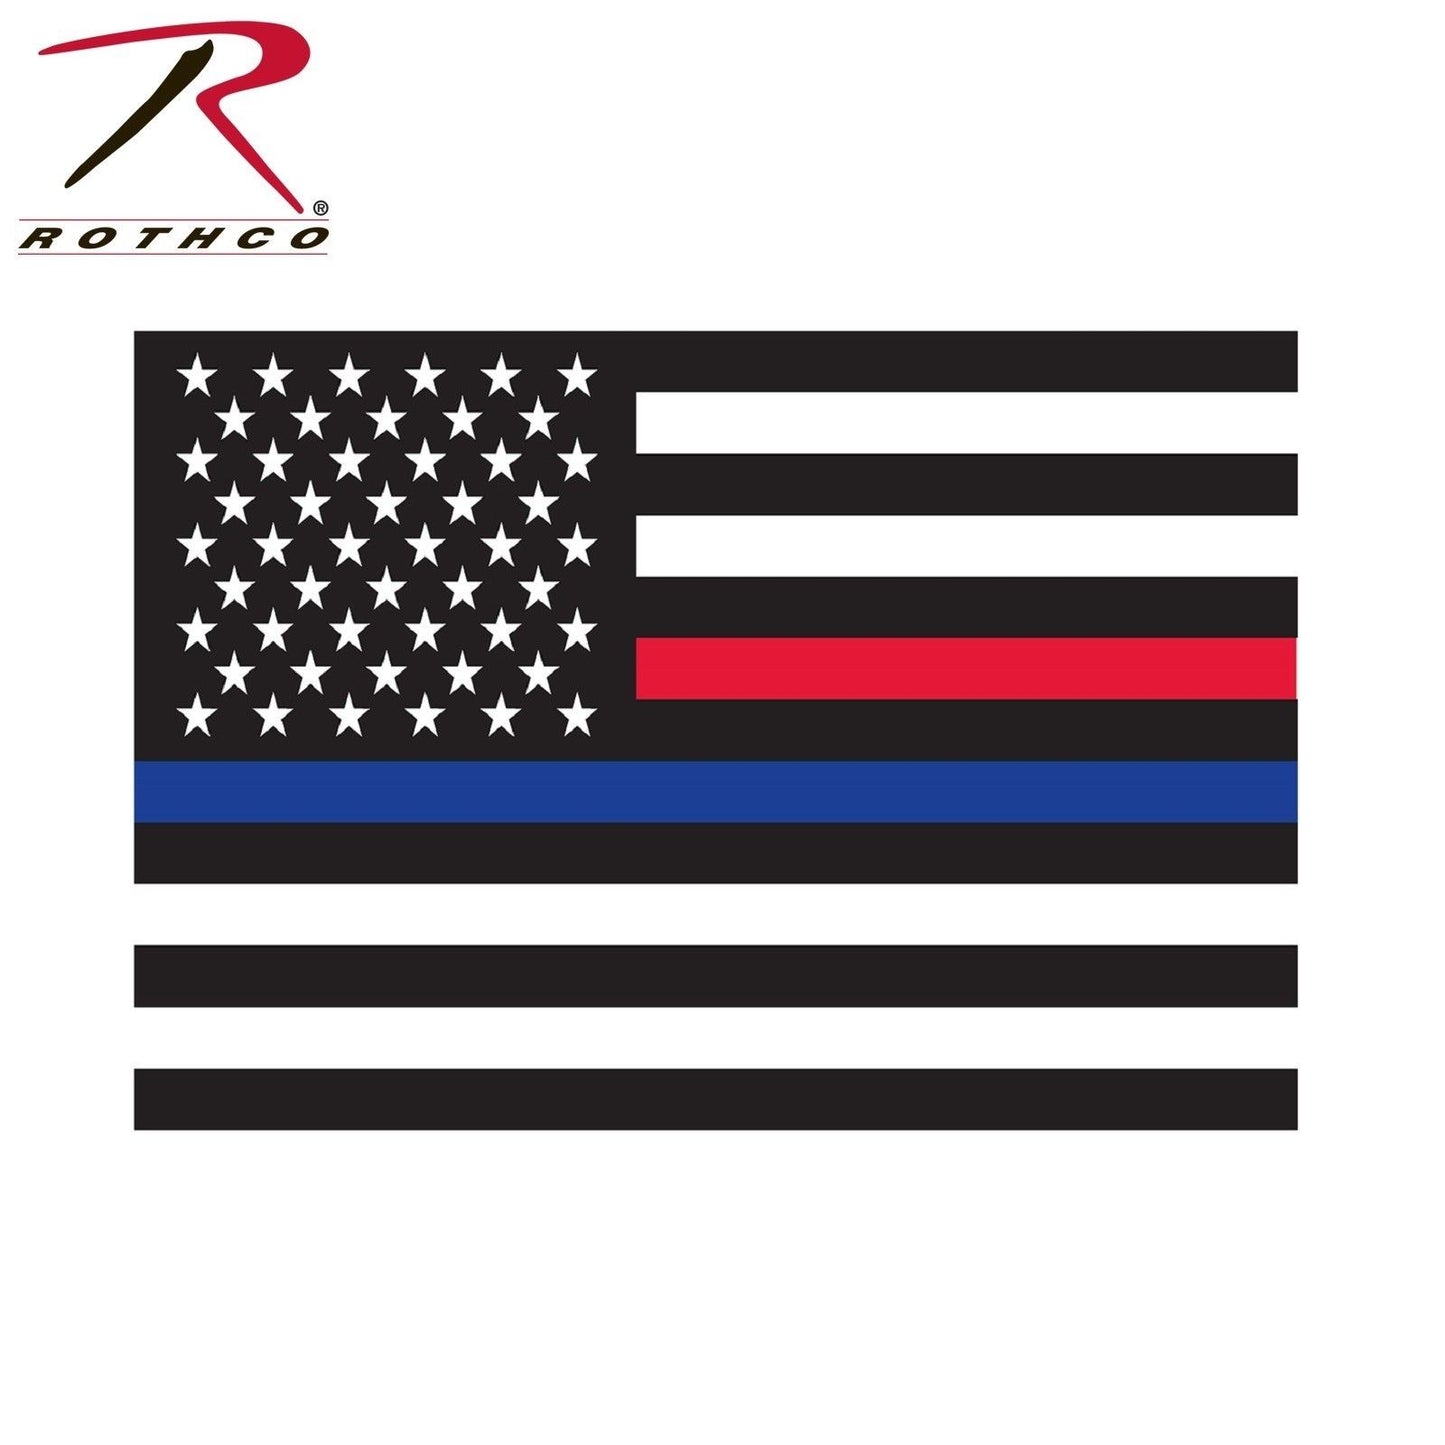 Rothco Thin Blue Line & Thin Red Line US Flag Decal - Window Decal